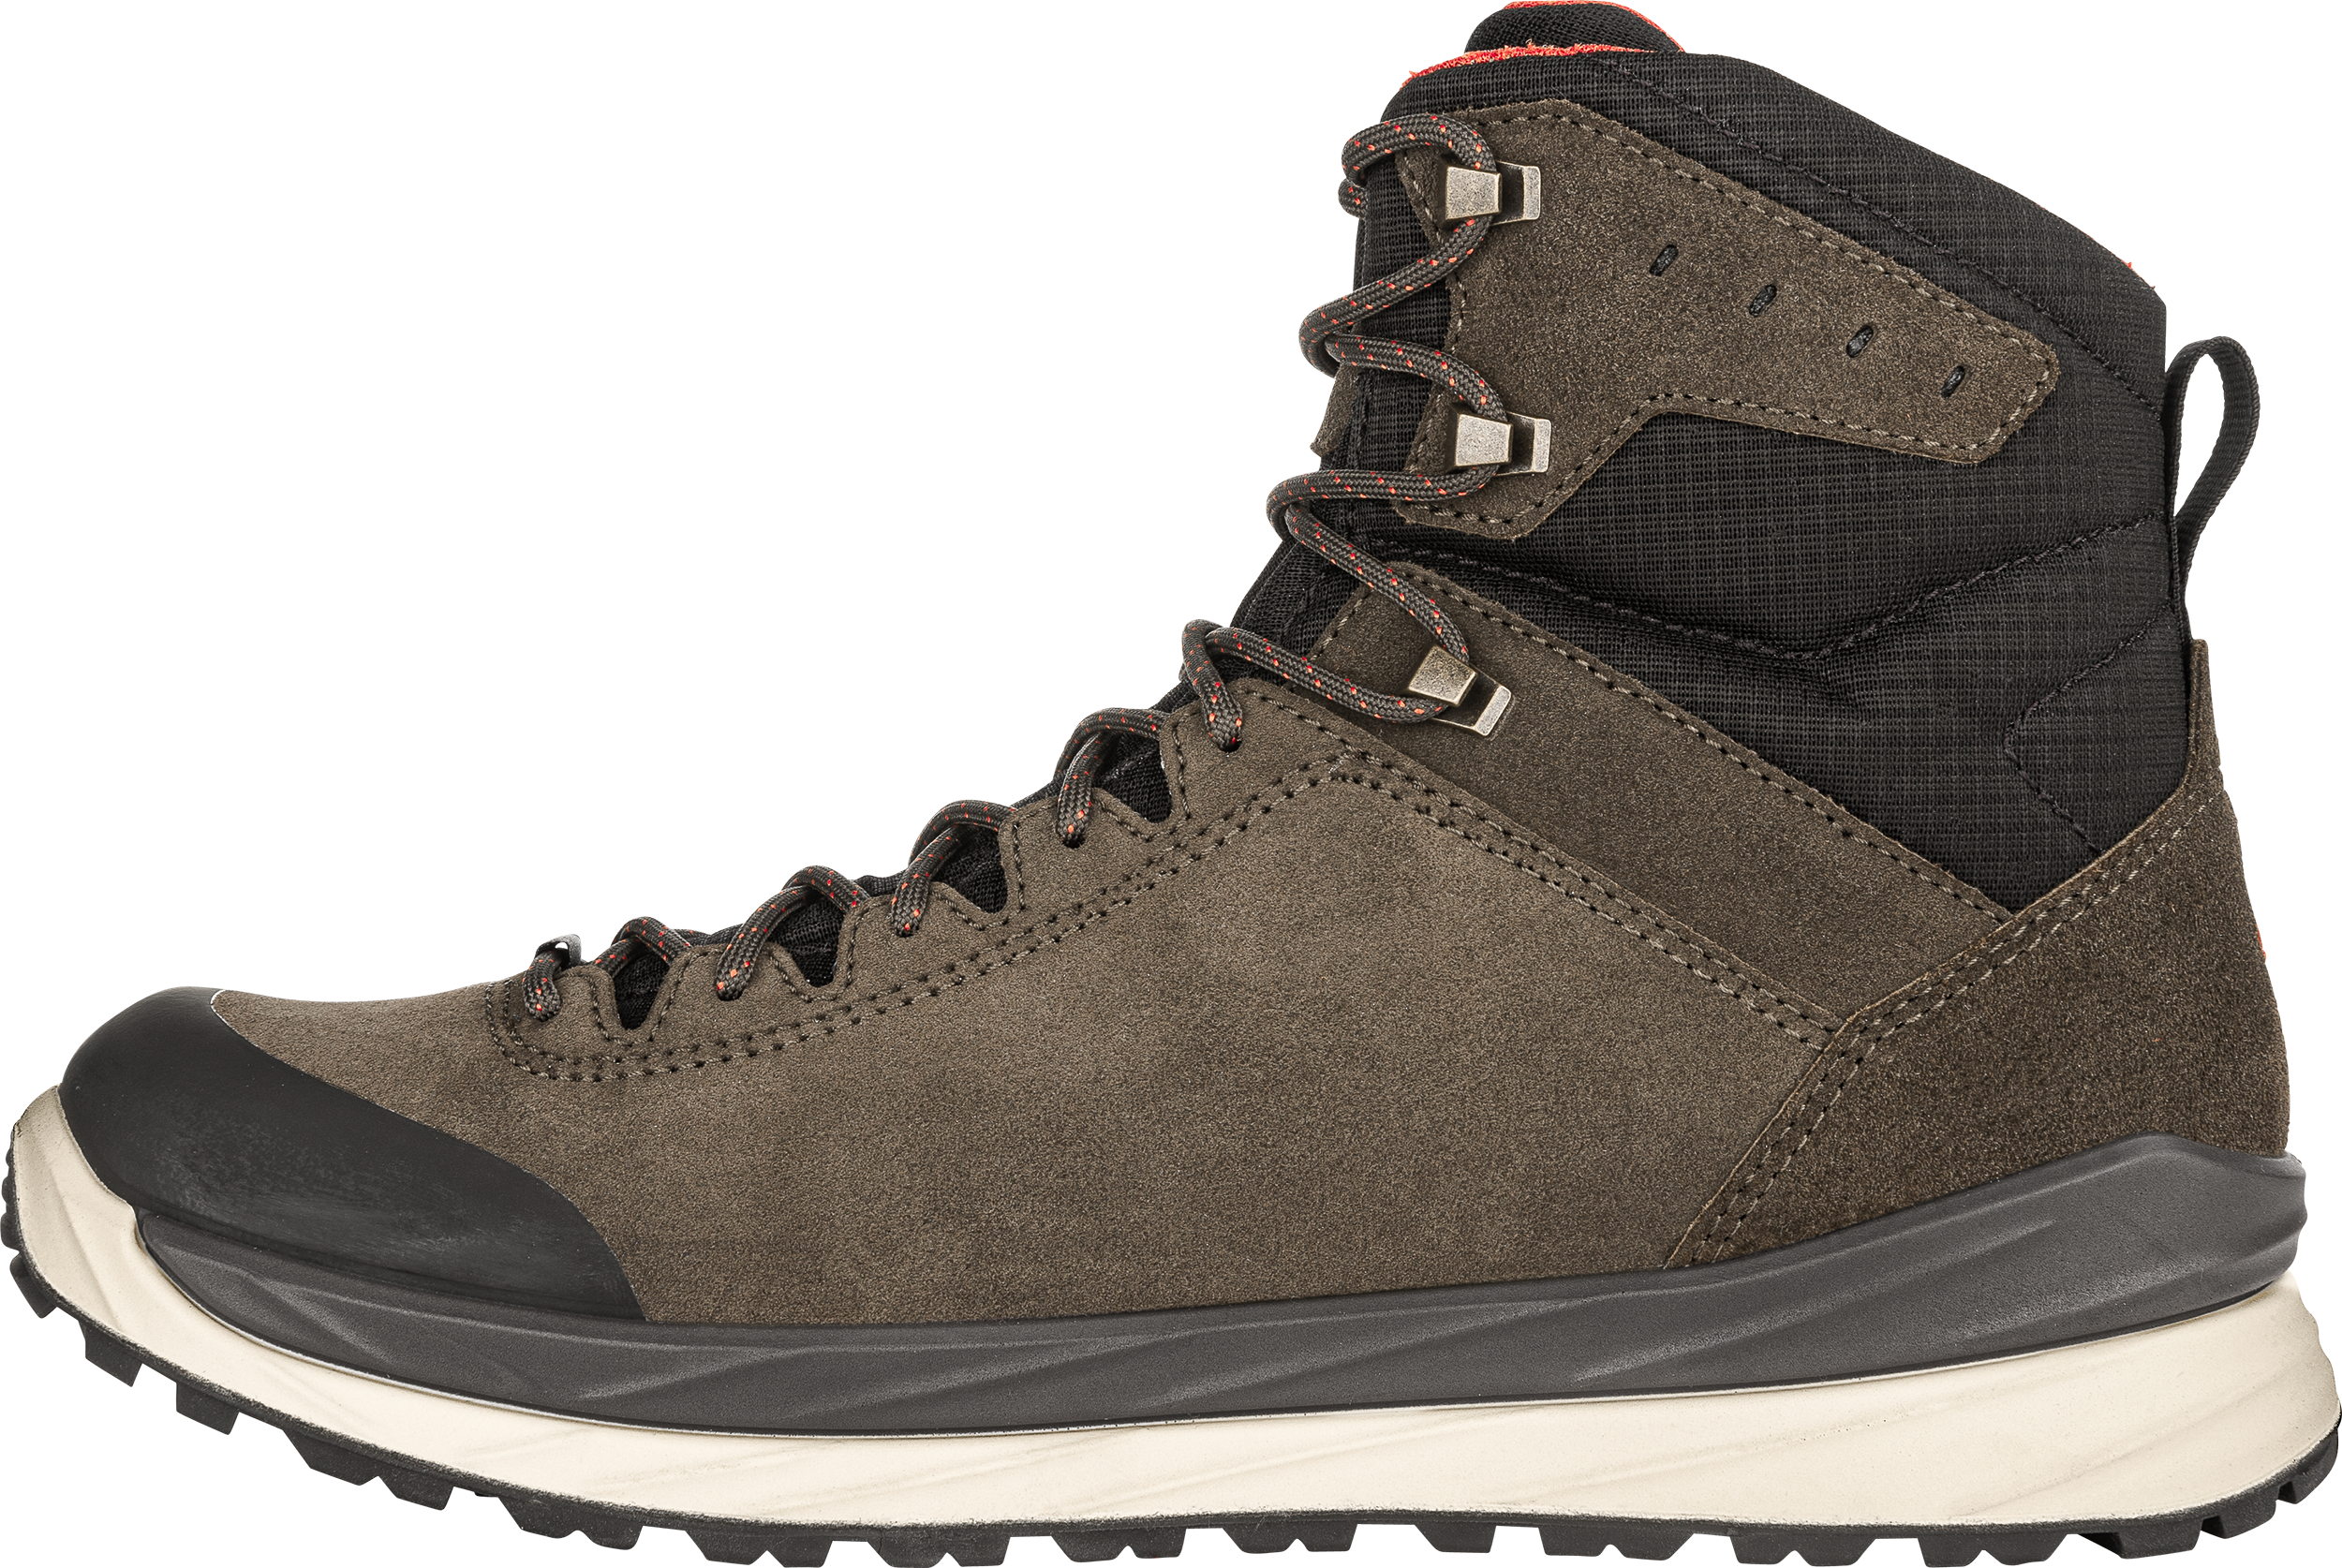 MALTA GTX MID: EVERYDAY shoes for men stylish and functional | LOWA INT